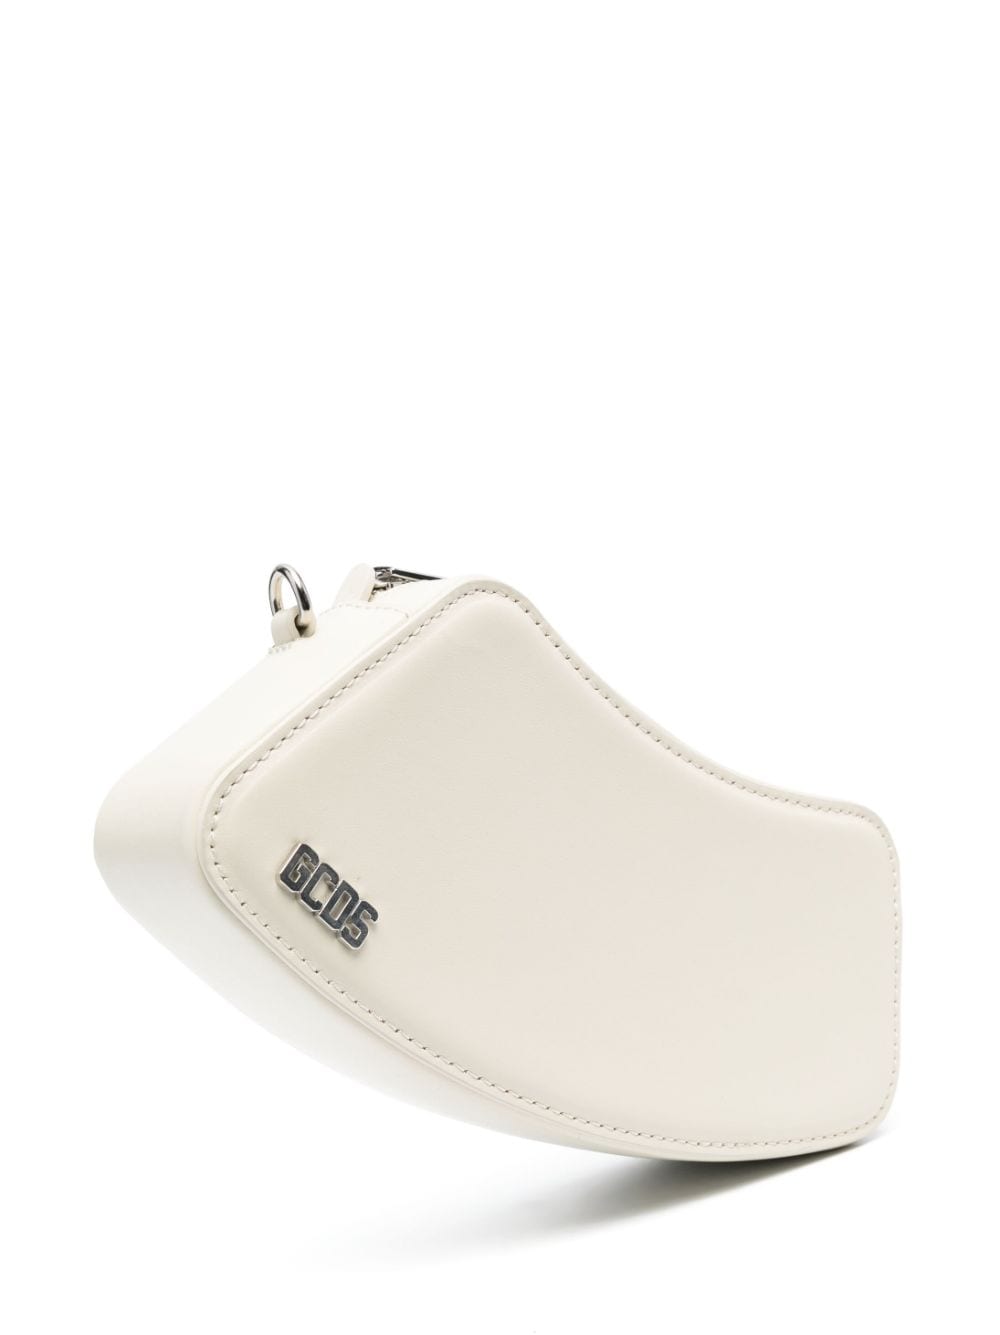 Shop Gcds Small Comma Leather Crossbody Bag In Neutrals